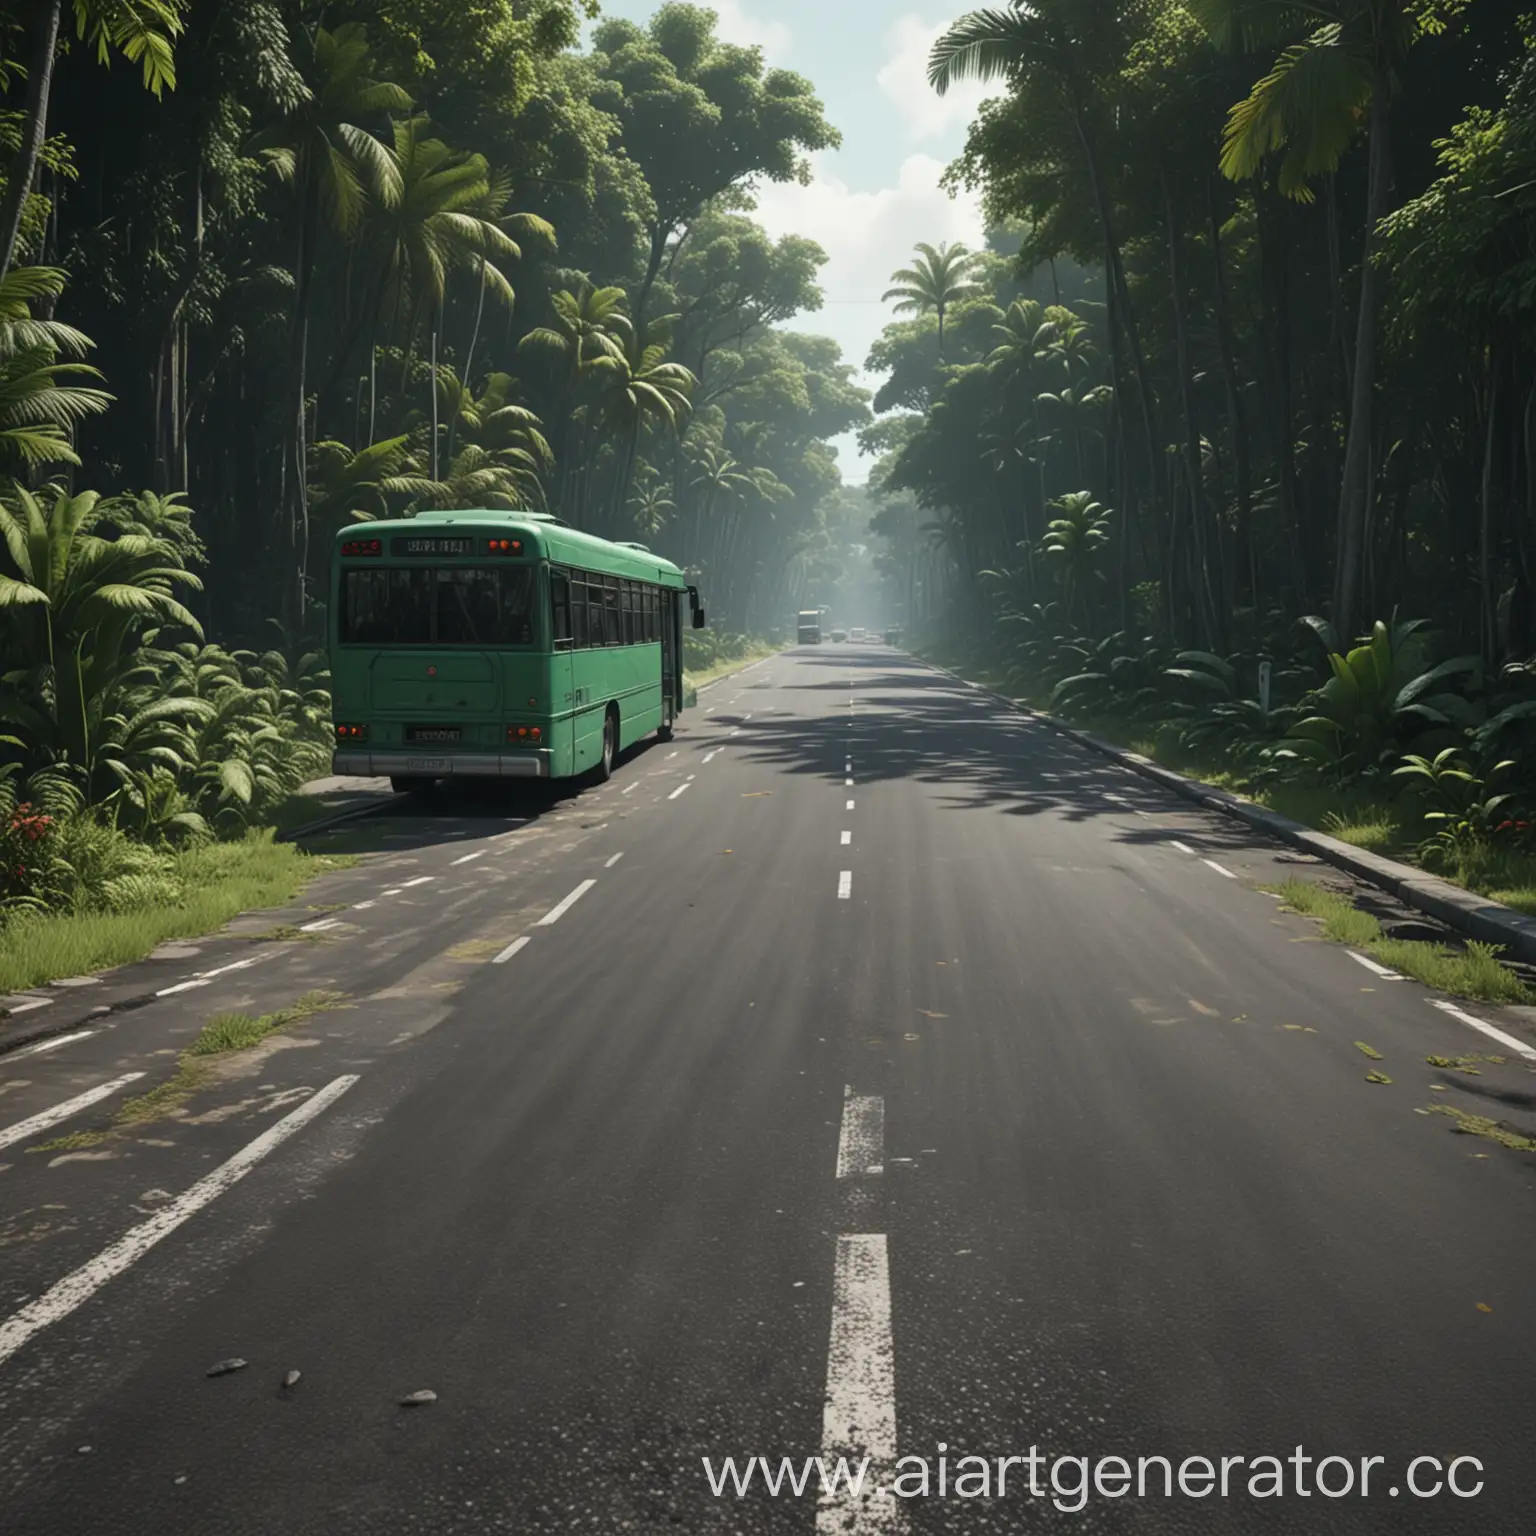 Abandoned-Bus-in-Lush-Tropical-Forest-Scene-of-Desolation-and-Natures-Reclamation